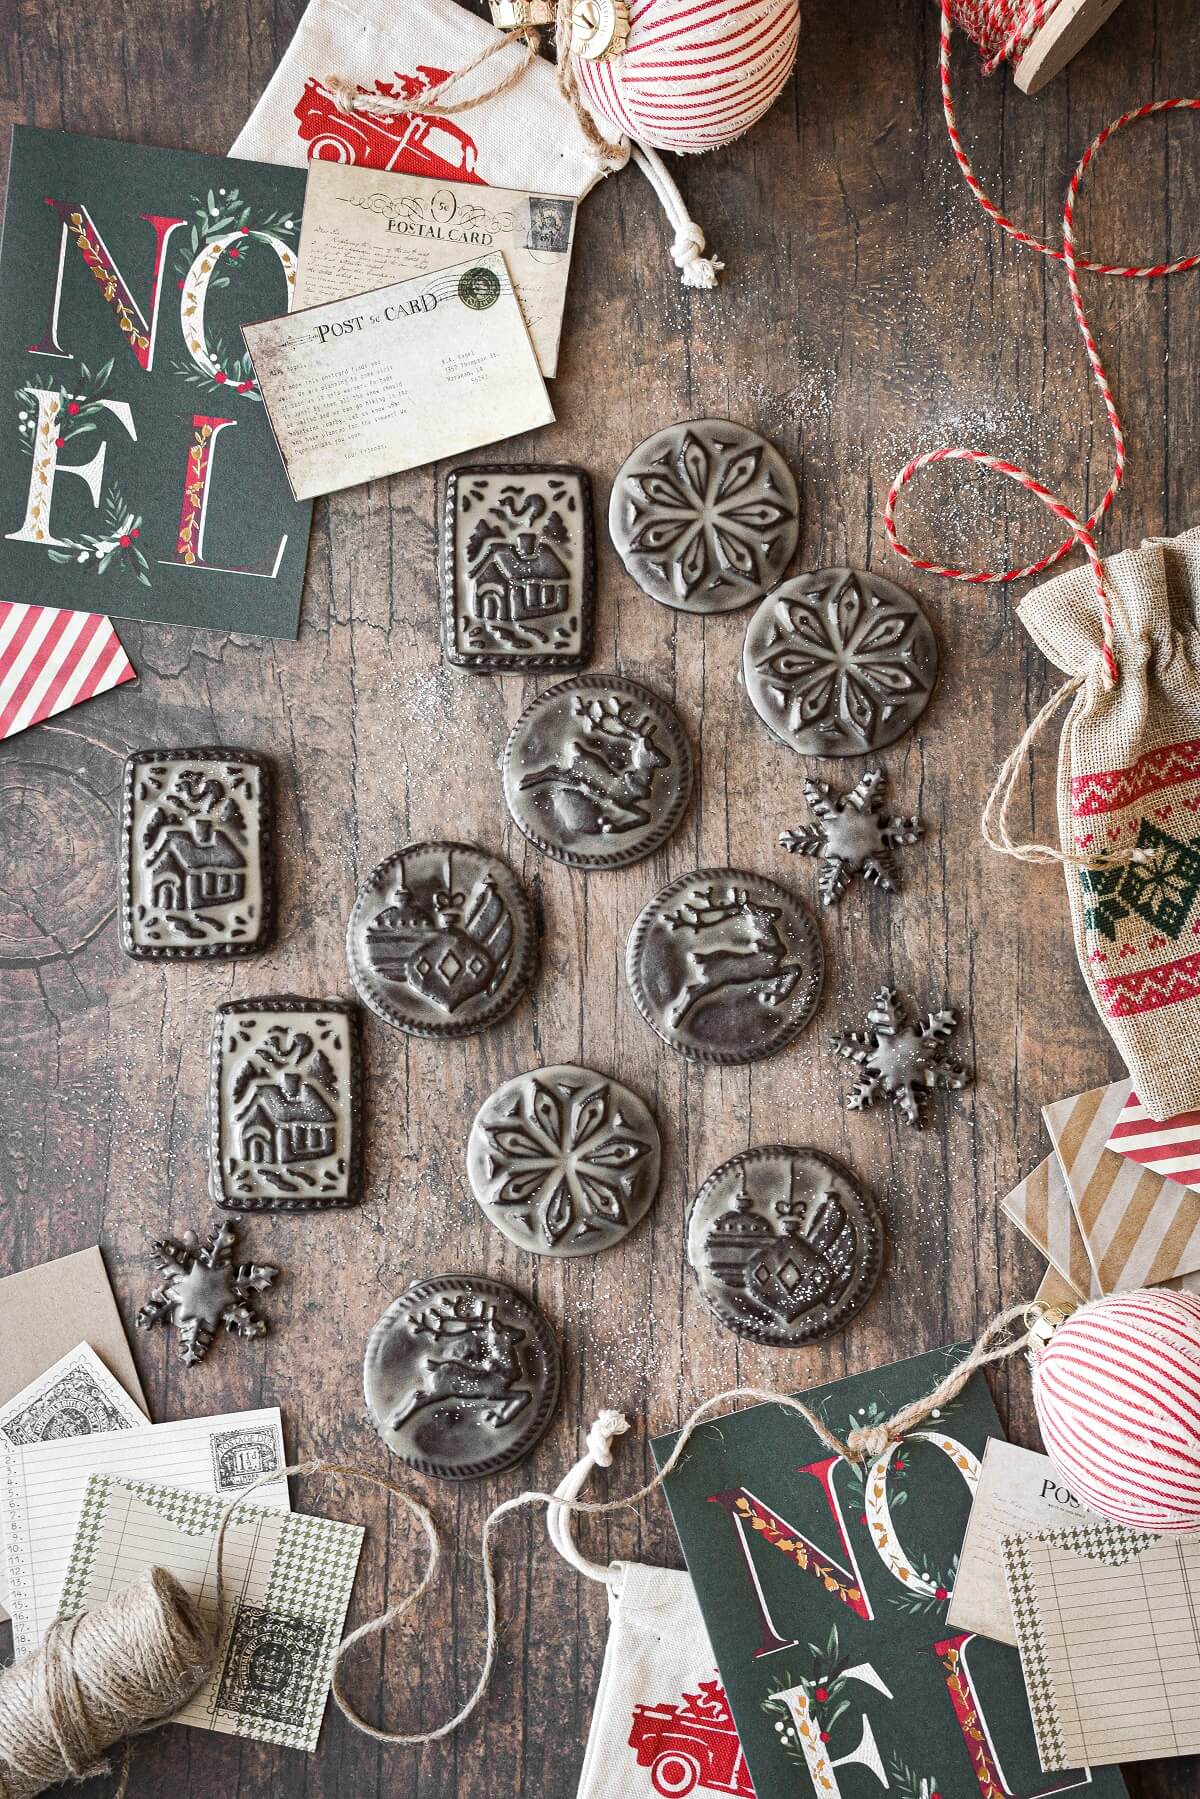 Stamped chocolate shortbread cookies with Christmas designs, surrounded by Christmas cards and twine.